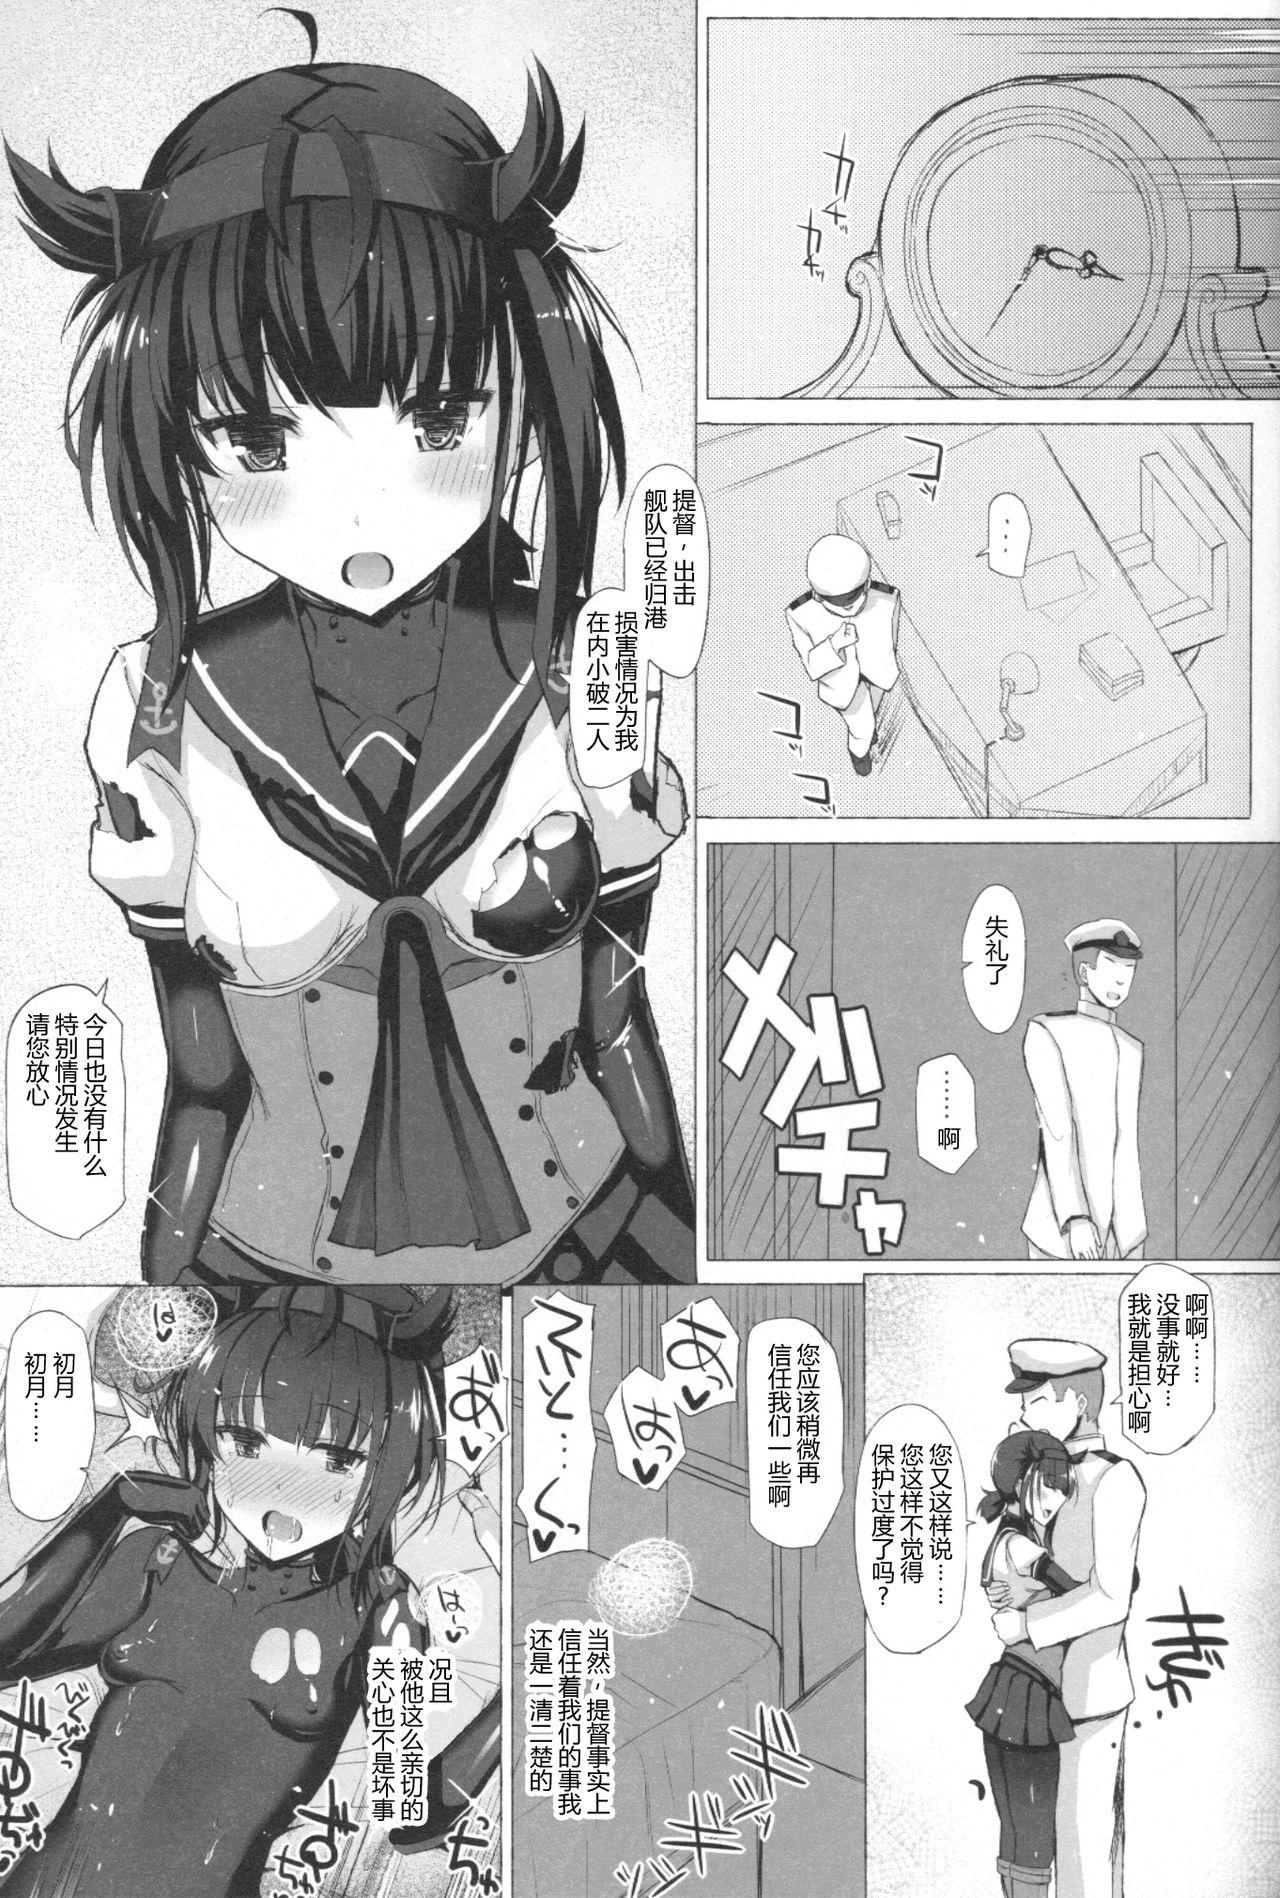 Teenage LOVE IS THE DRUG - Kantai collection Climax - Page 2